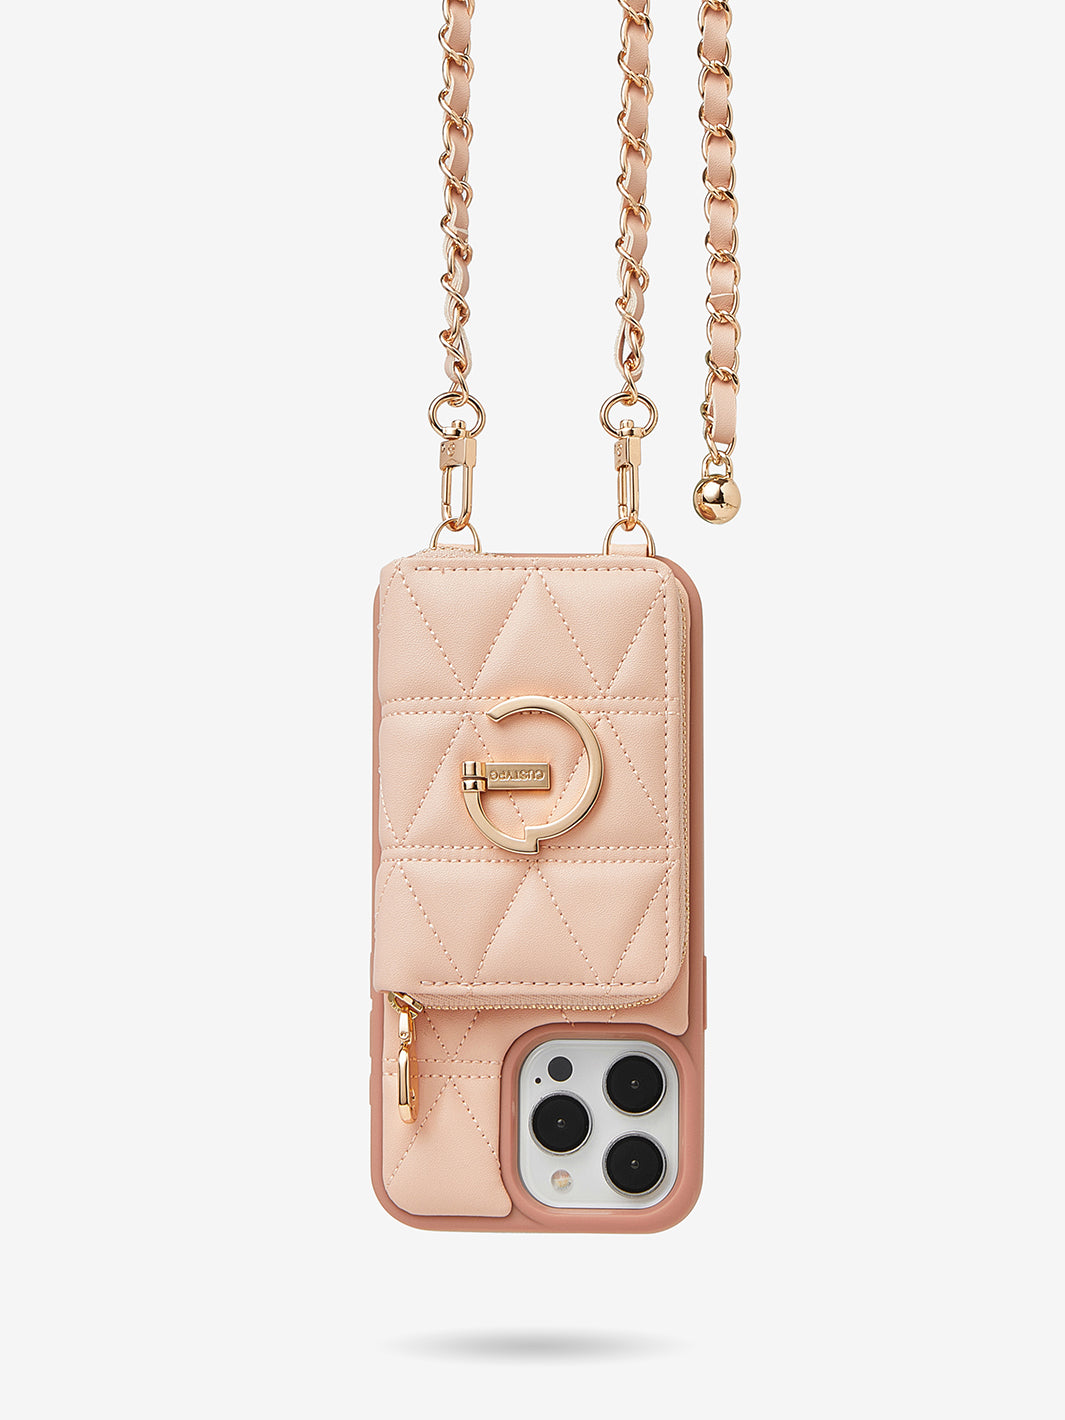 LuxeCharm- Triangle Argyle Phone Case with Chain Leather Strap-pink